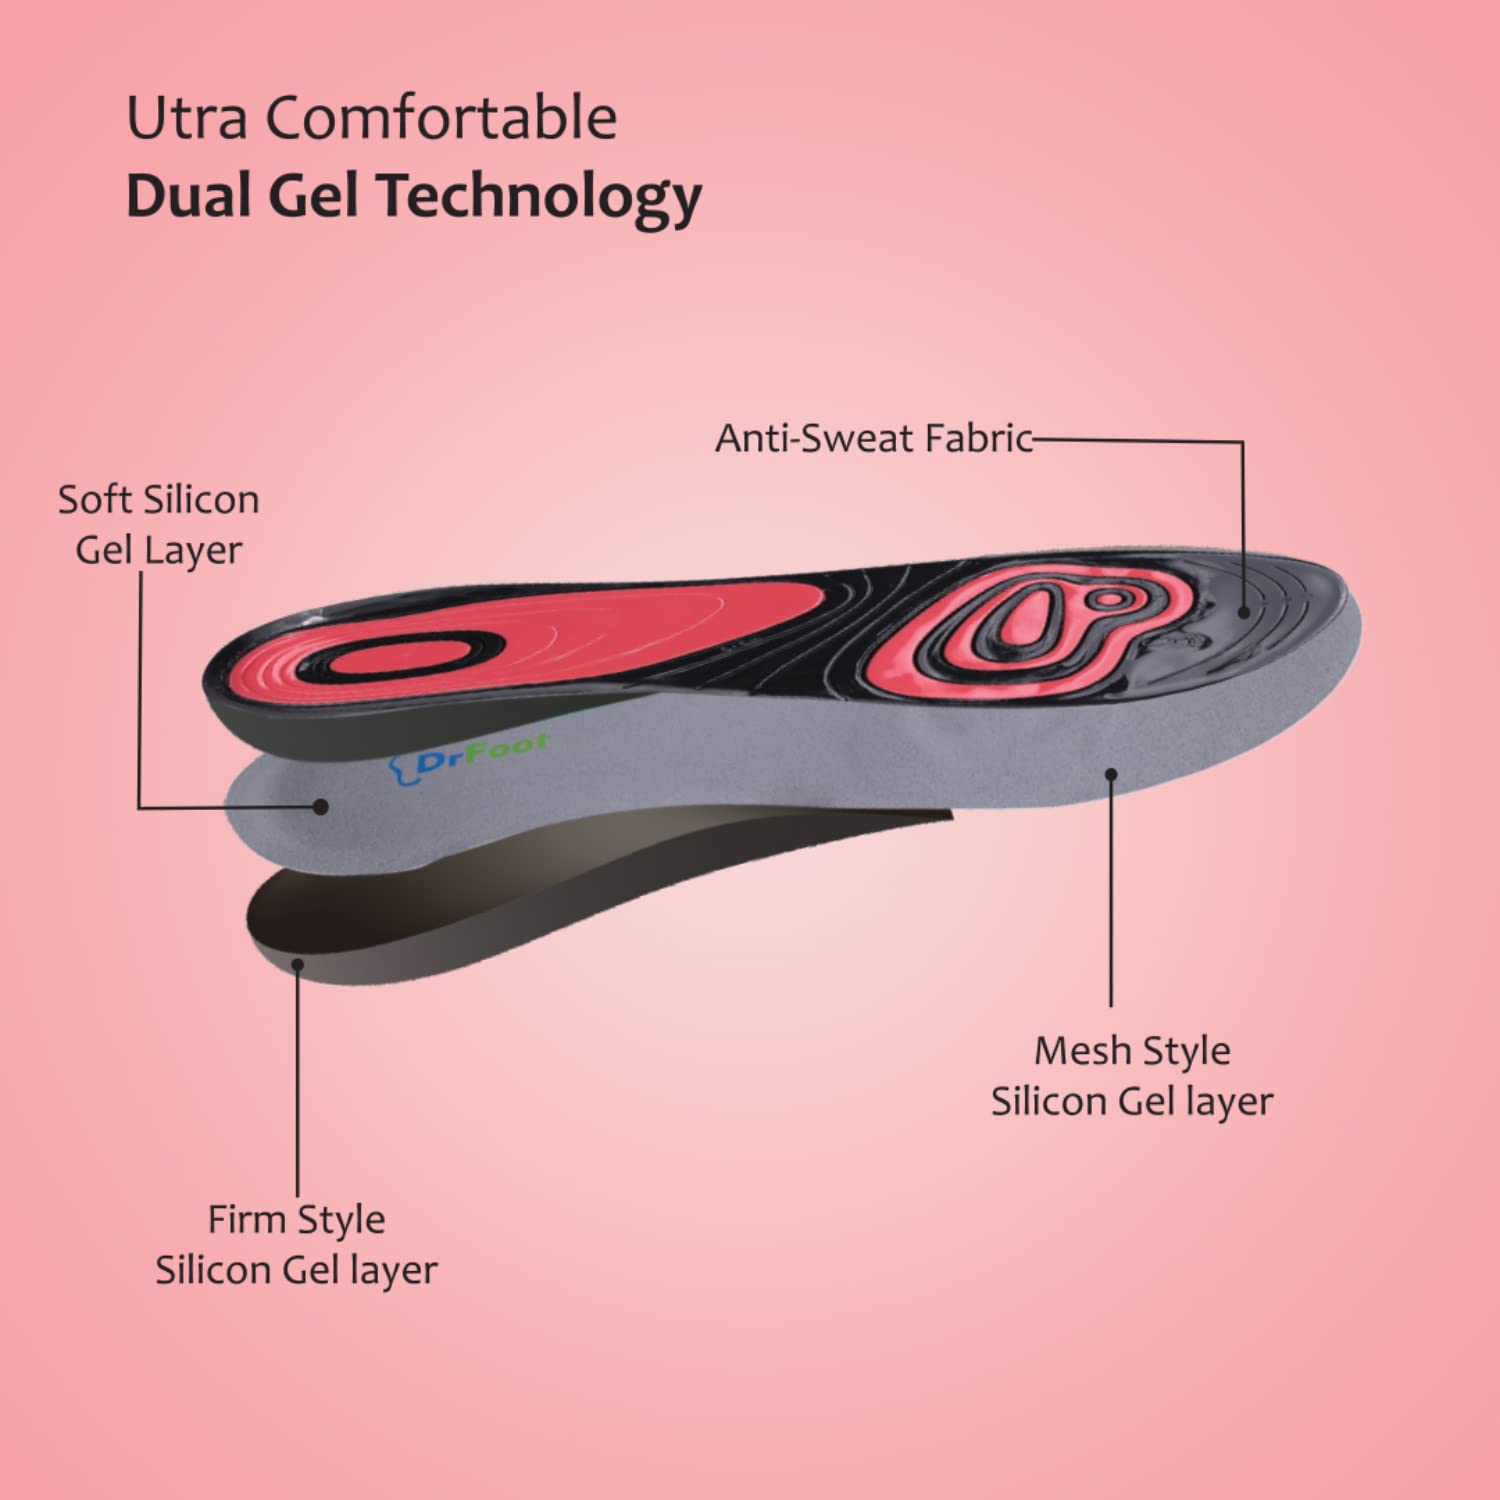 Dr Foot Dual Gel Insoles Anti-Microbial | For Walking, Running, Hiking & Regular Use | All Day Ultra Comfrort & Support & Shock Absorption With Dual Gel Technology | For Women – 1 Pair